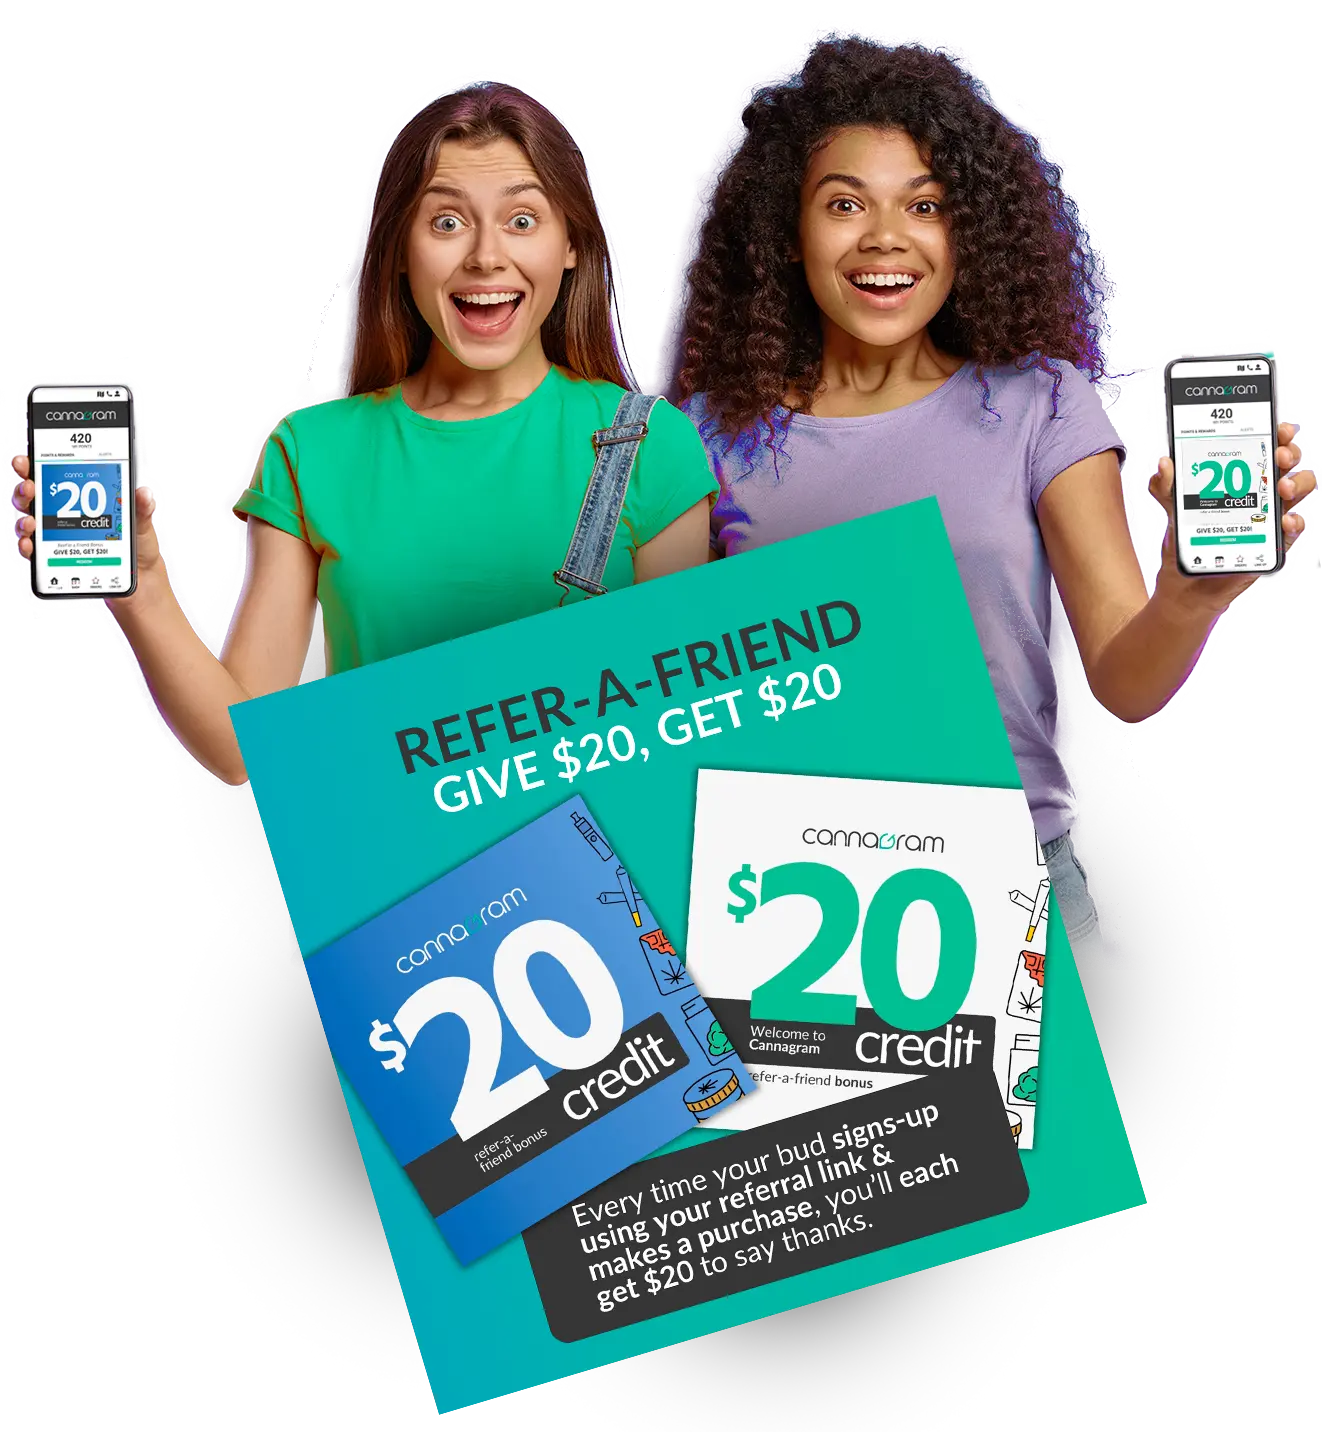 Refer a Friend and Get $20 - Dispensary Loyalty Program Delivery in sacramento